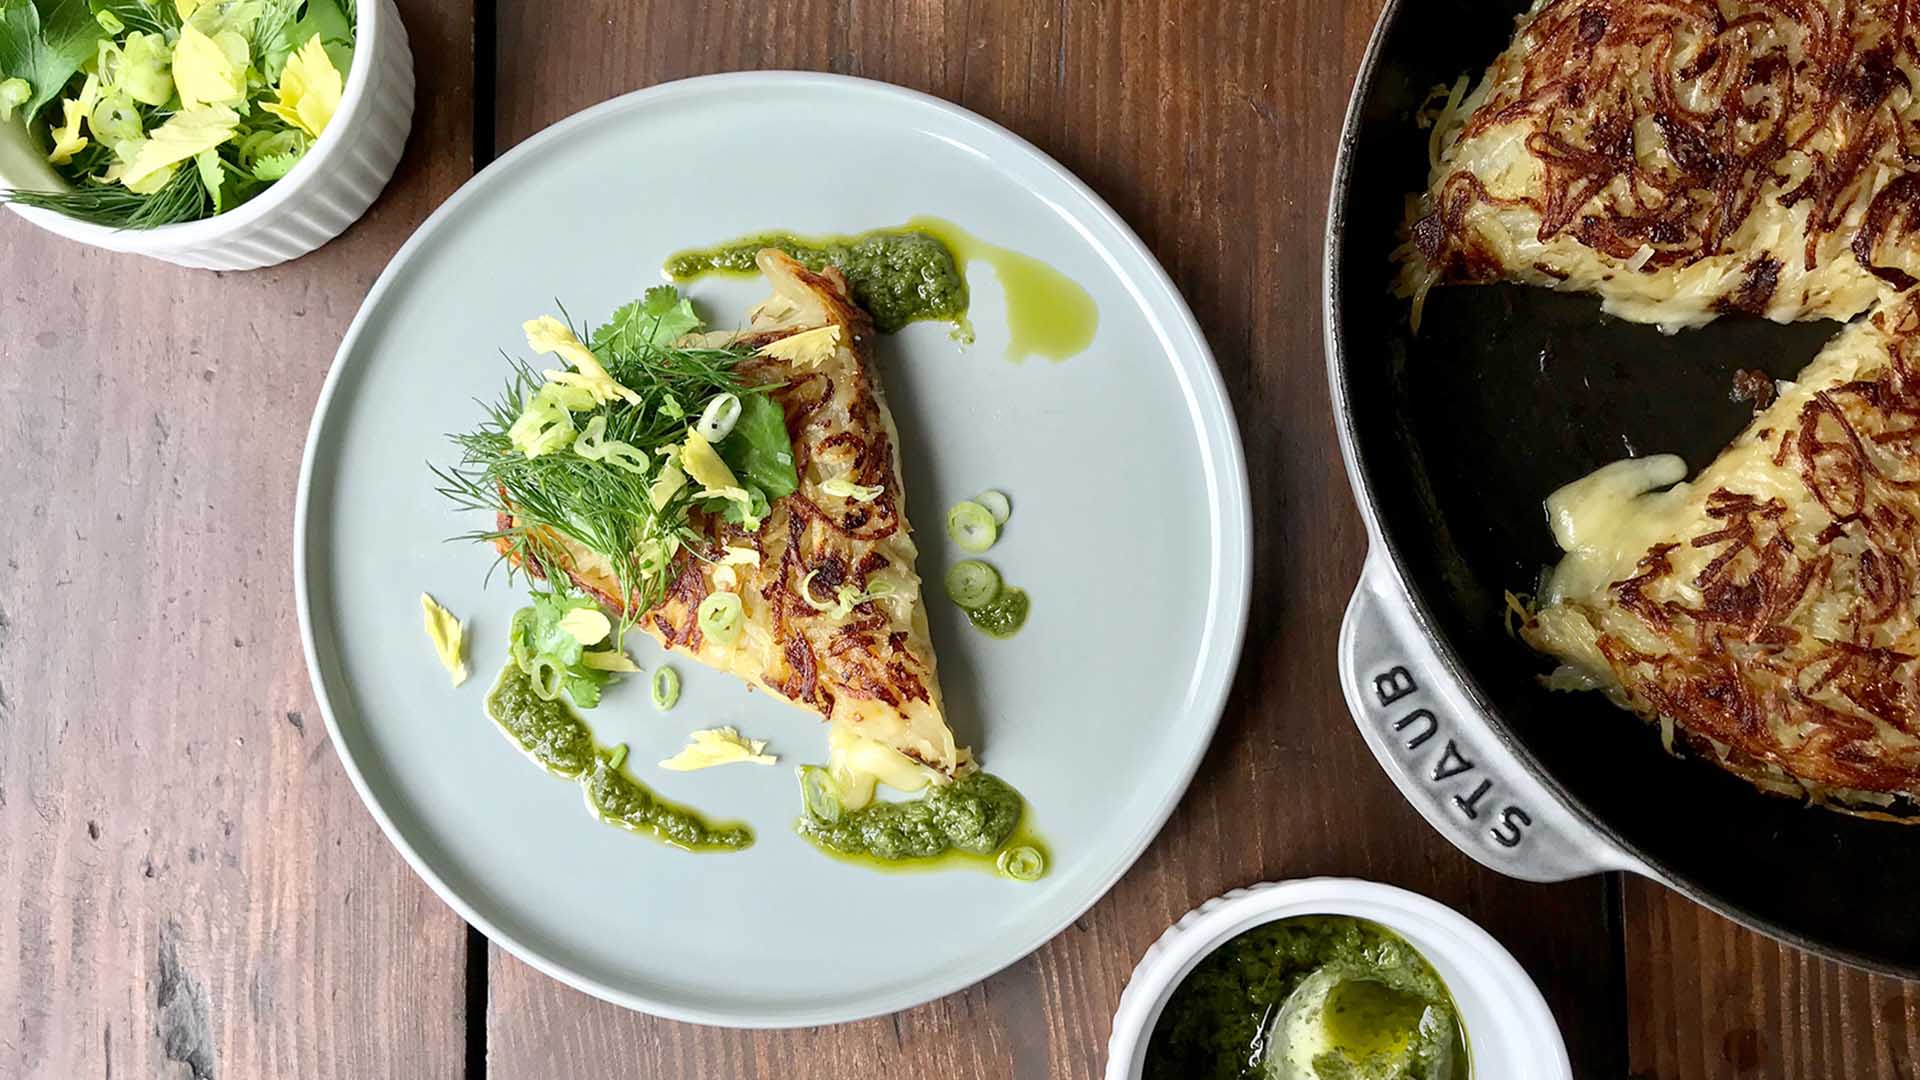 Overhead shot of potato rosti with green drizzle and green onion garnish on round white plate on wooden surface next to pan of rosti and two small white bowls.